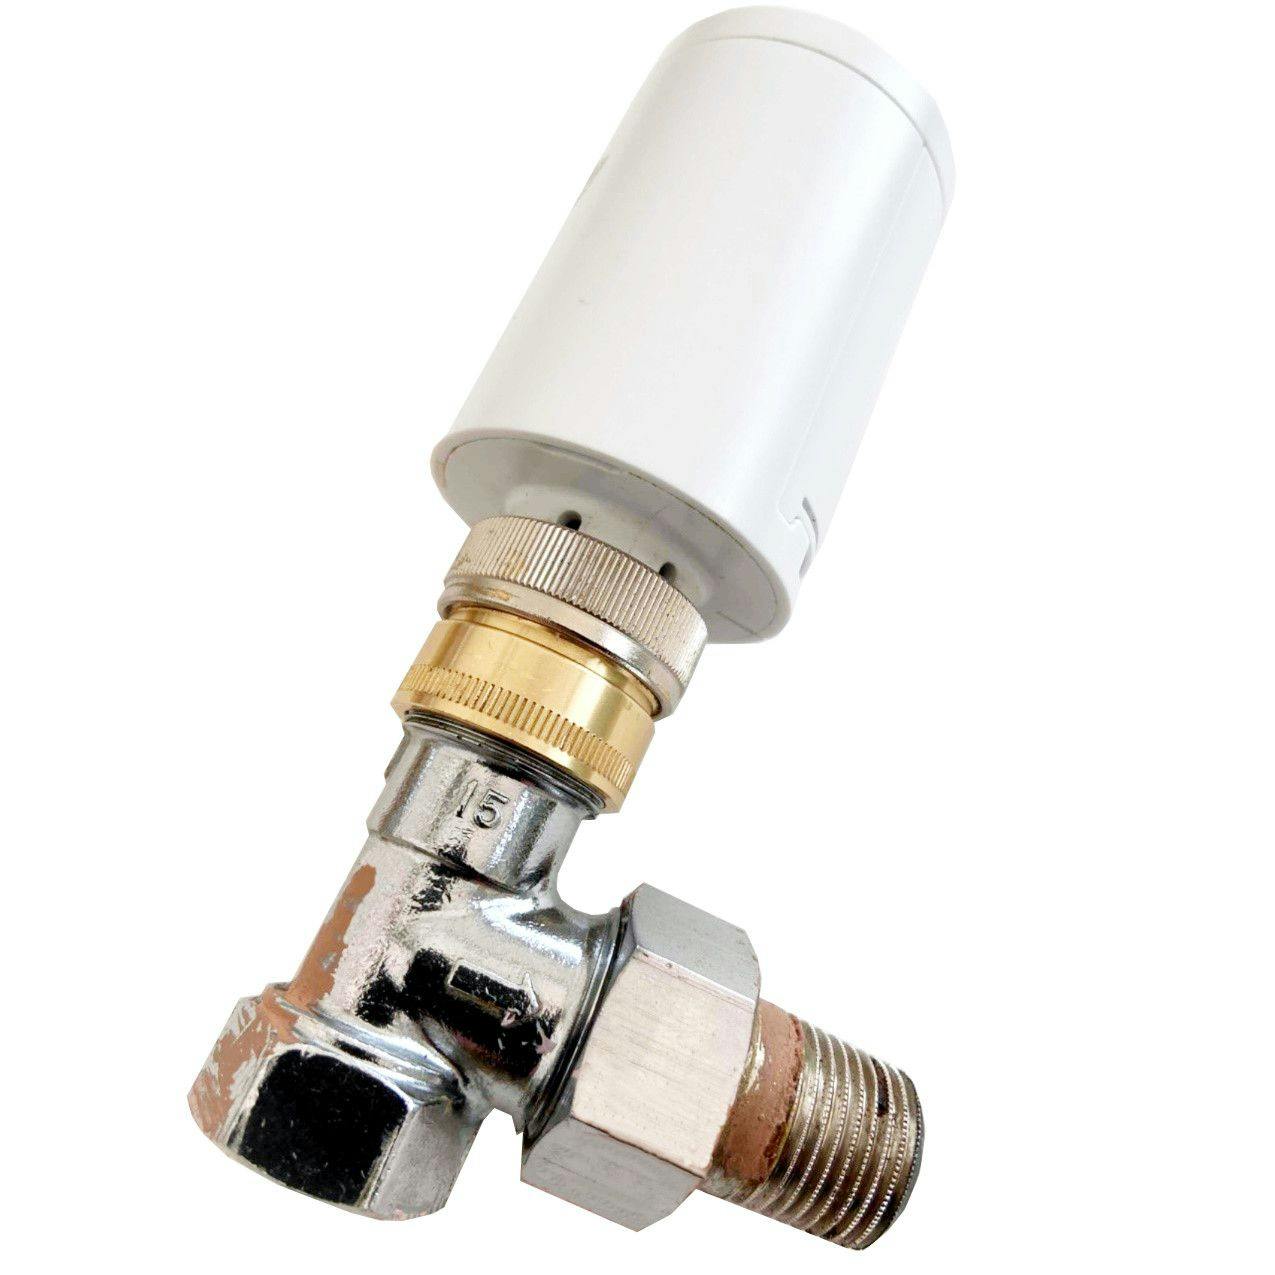 What is a HS-TRVD-AD Adaptor For Drayton TRV3 Thermostatic Radiator Valves? case study image